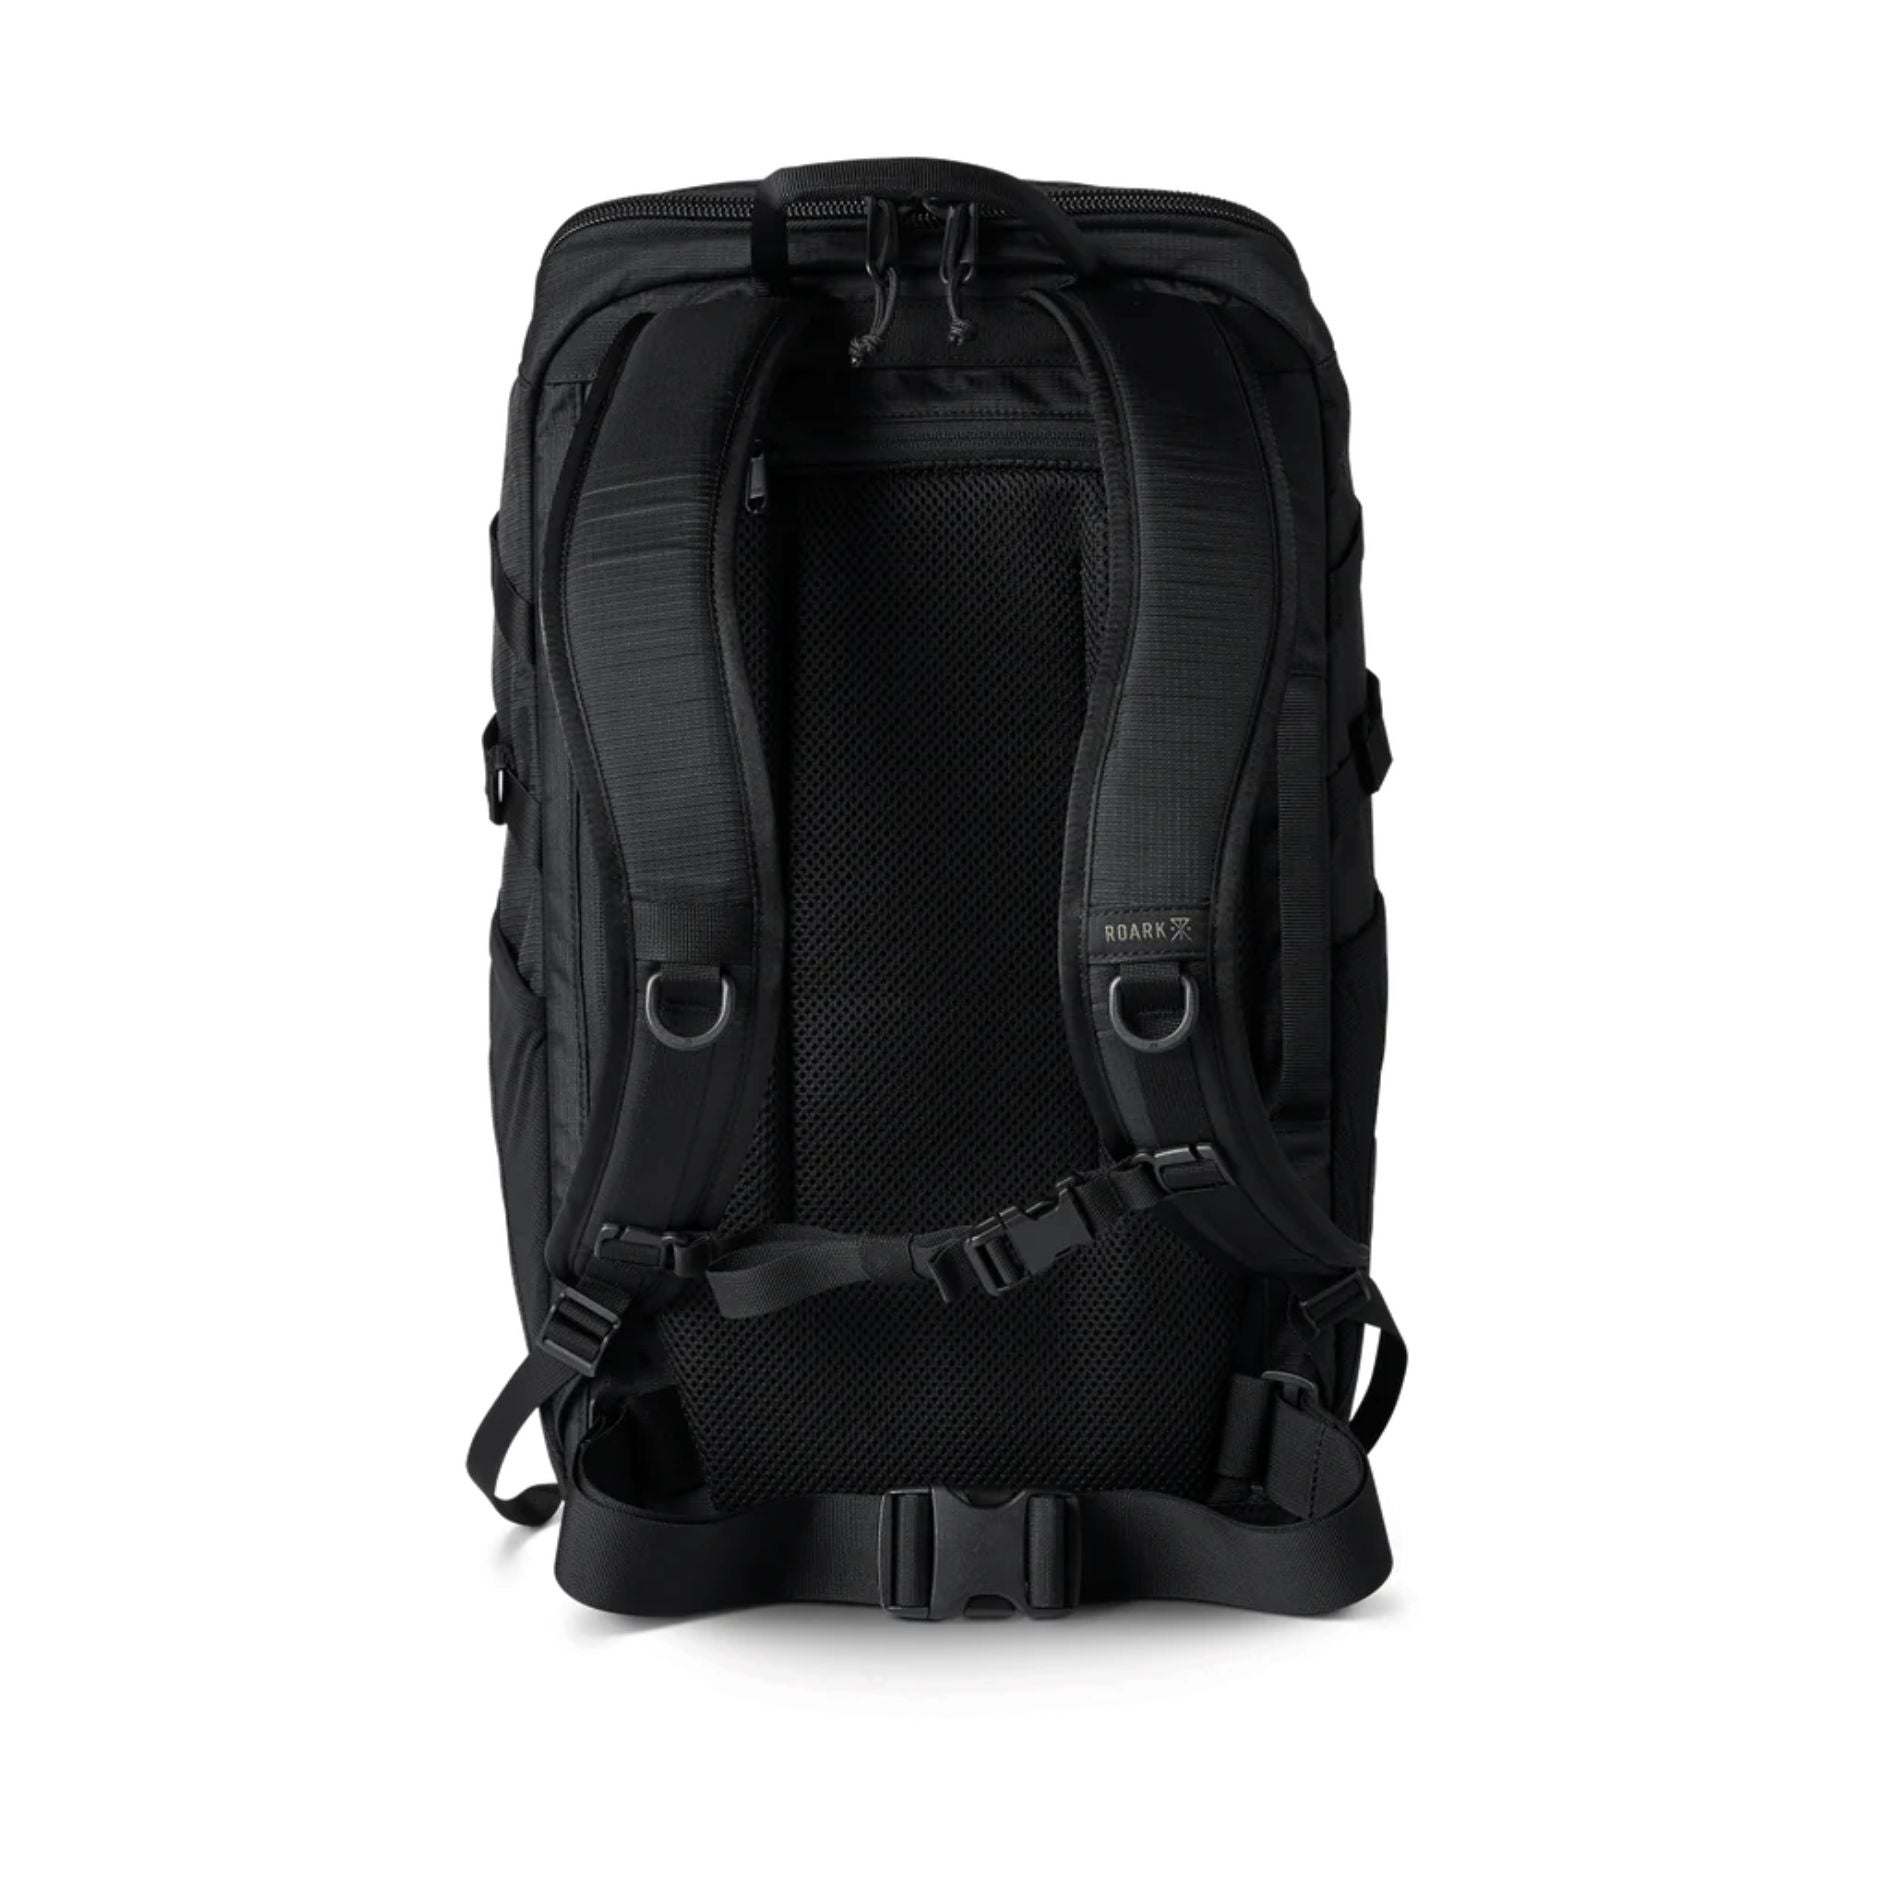 Accomplice Mule 25L Backpack